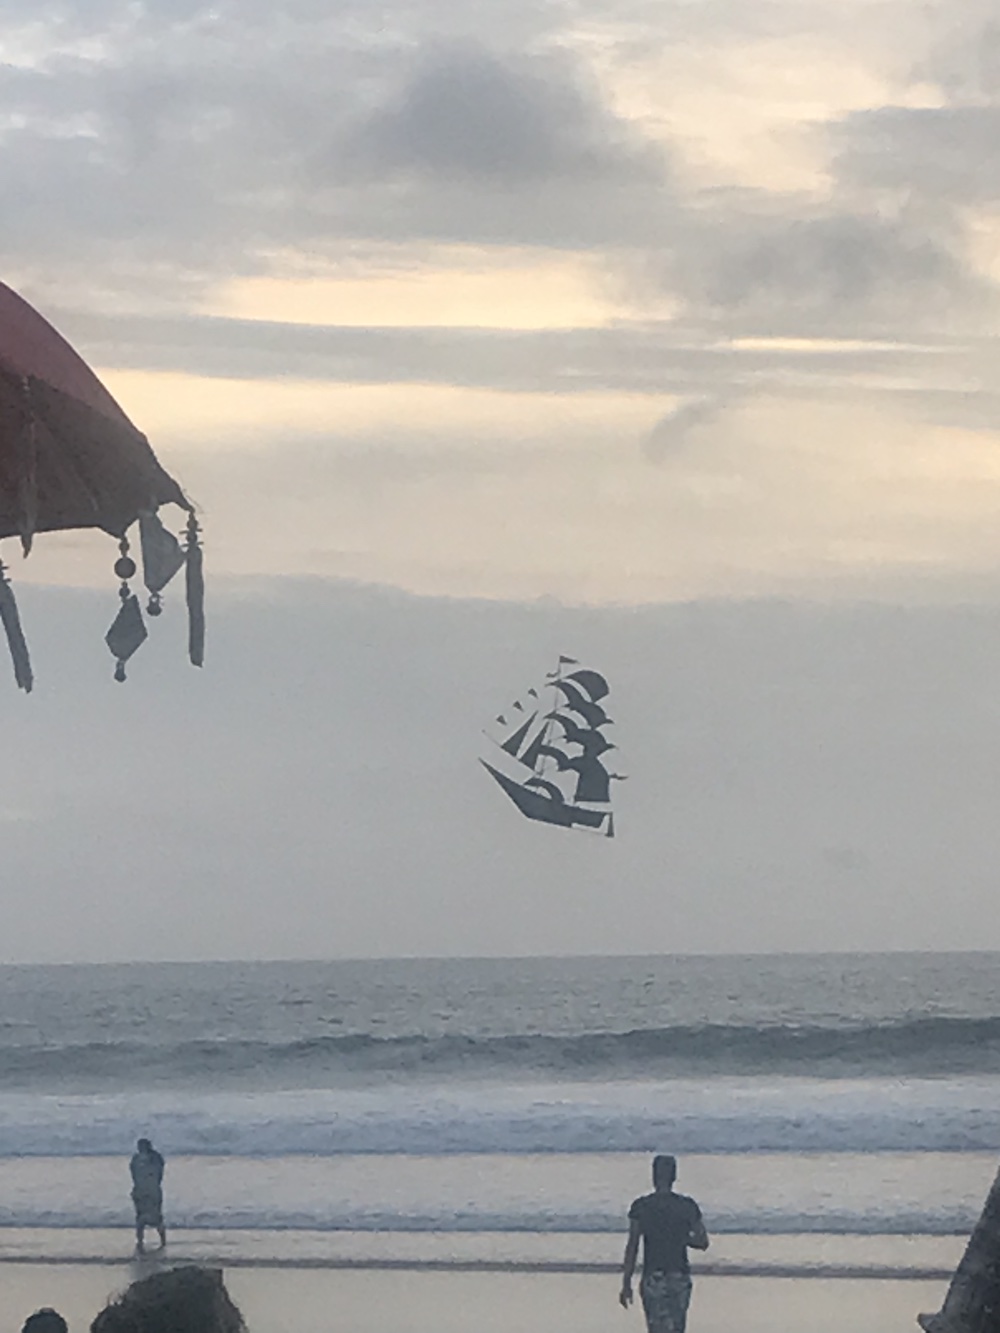 A pirate ship shaped kite flying at a beach